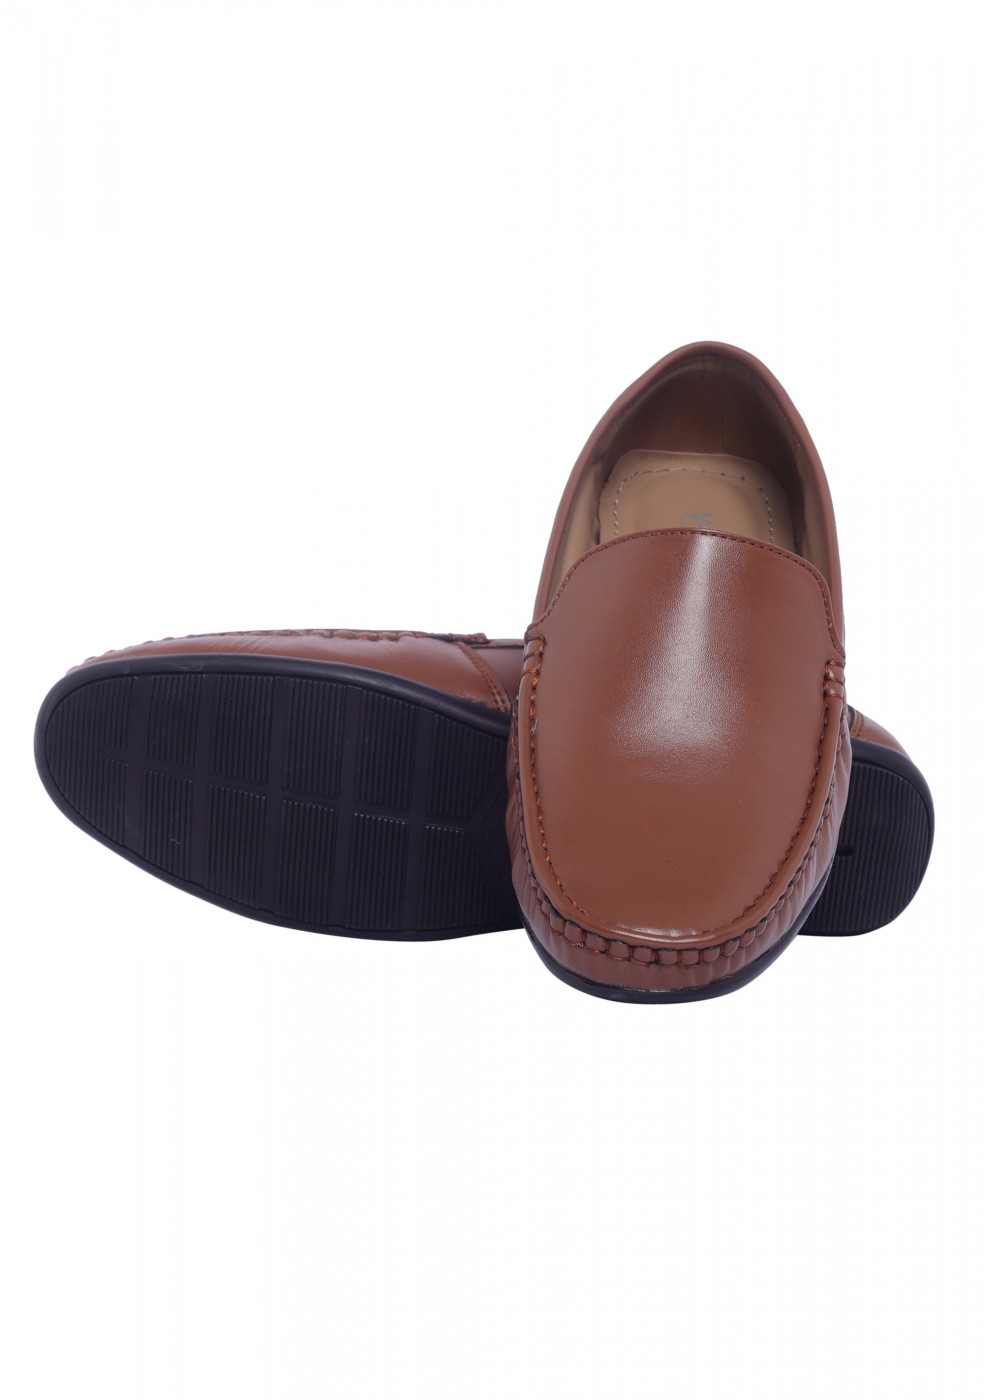 XSTOM Leather Casual Stylish TAN Color Loafers for Men